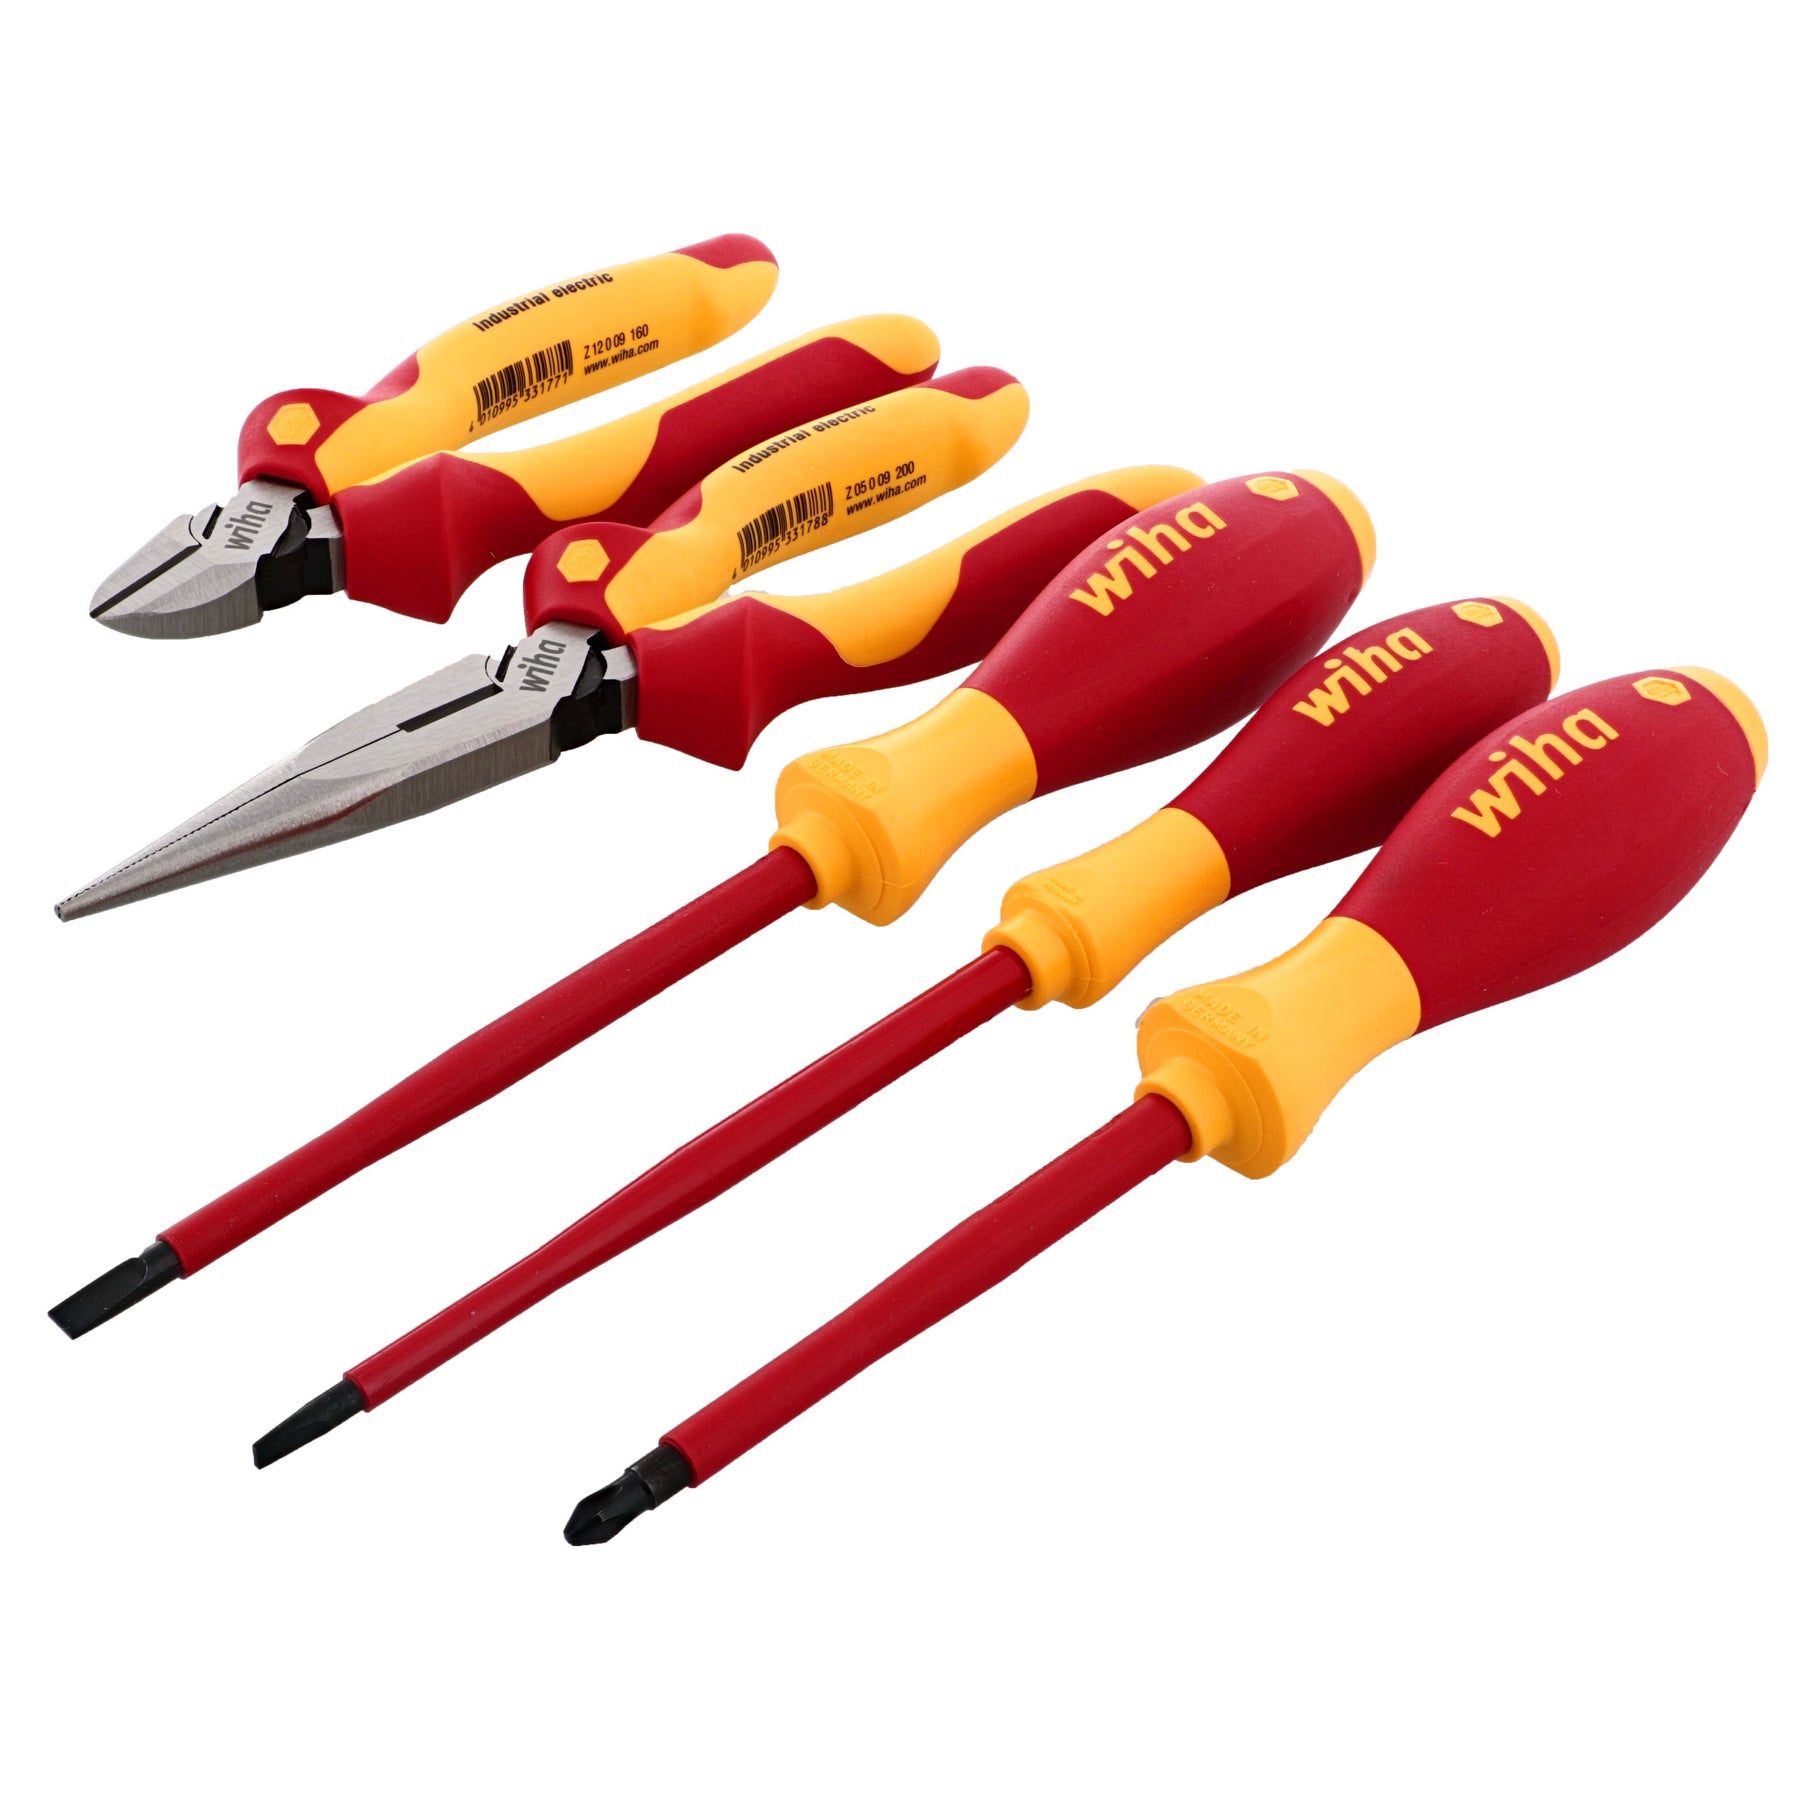 5 Piece Insulated Pliers-Cutters and Screwdriver Set